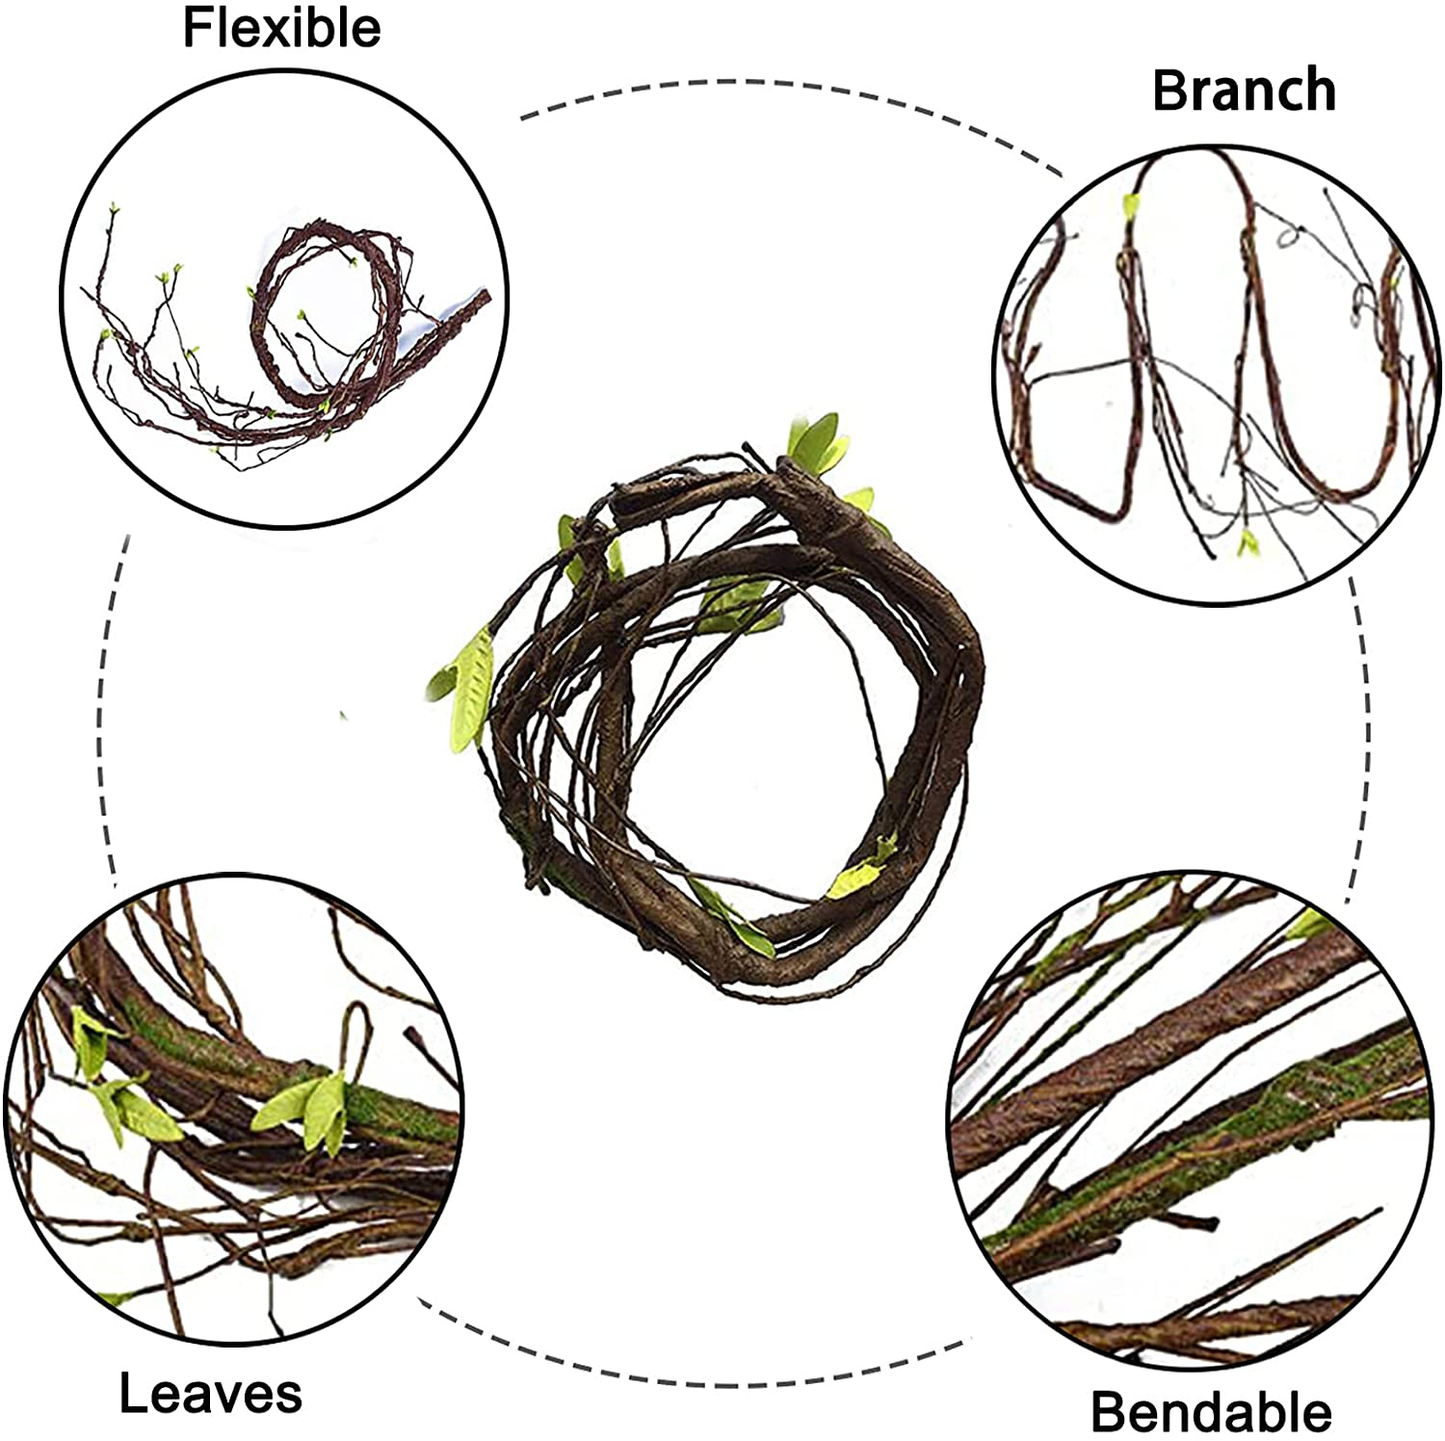 Reptile Bend-A-Branch Vines Flexible Leaves Pet Habitat Decor Climber Jungle Long Vines for Climbing Crested Gecko Lizard Frogs Snakes Chameleon 5 Pcs Animals & Pet Supplies > Pet Supplies > Reptile & Amphibian Supplies > Reptile & Amphibian Habitat Accessories Hamiledyi   